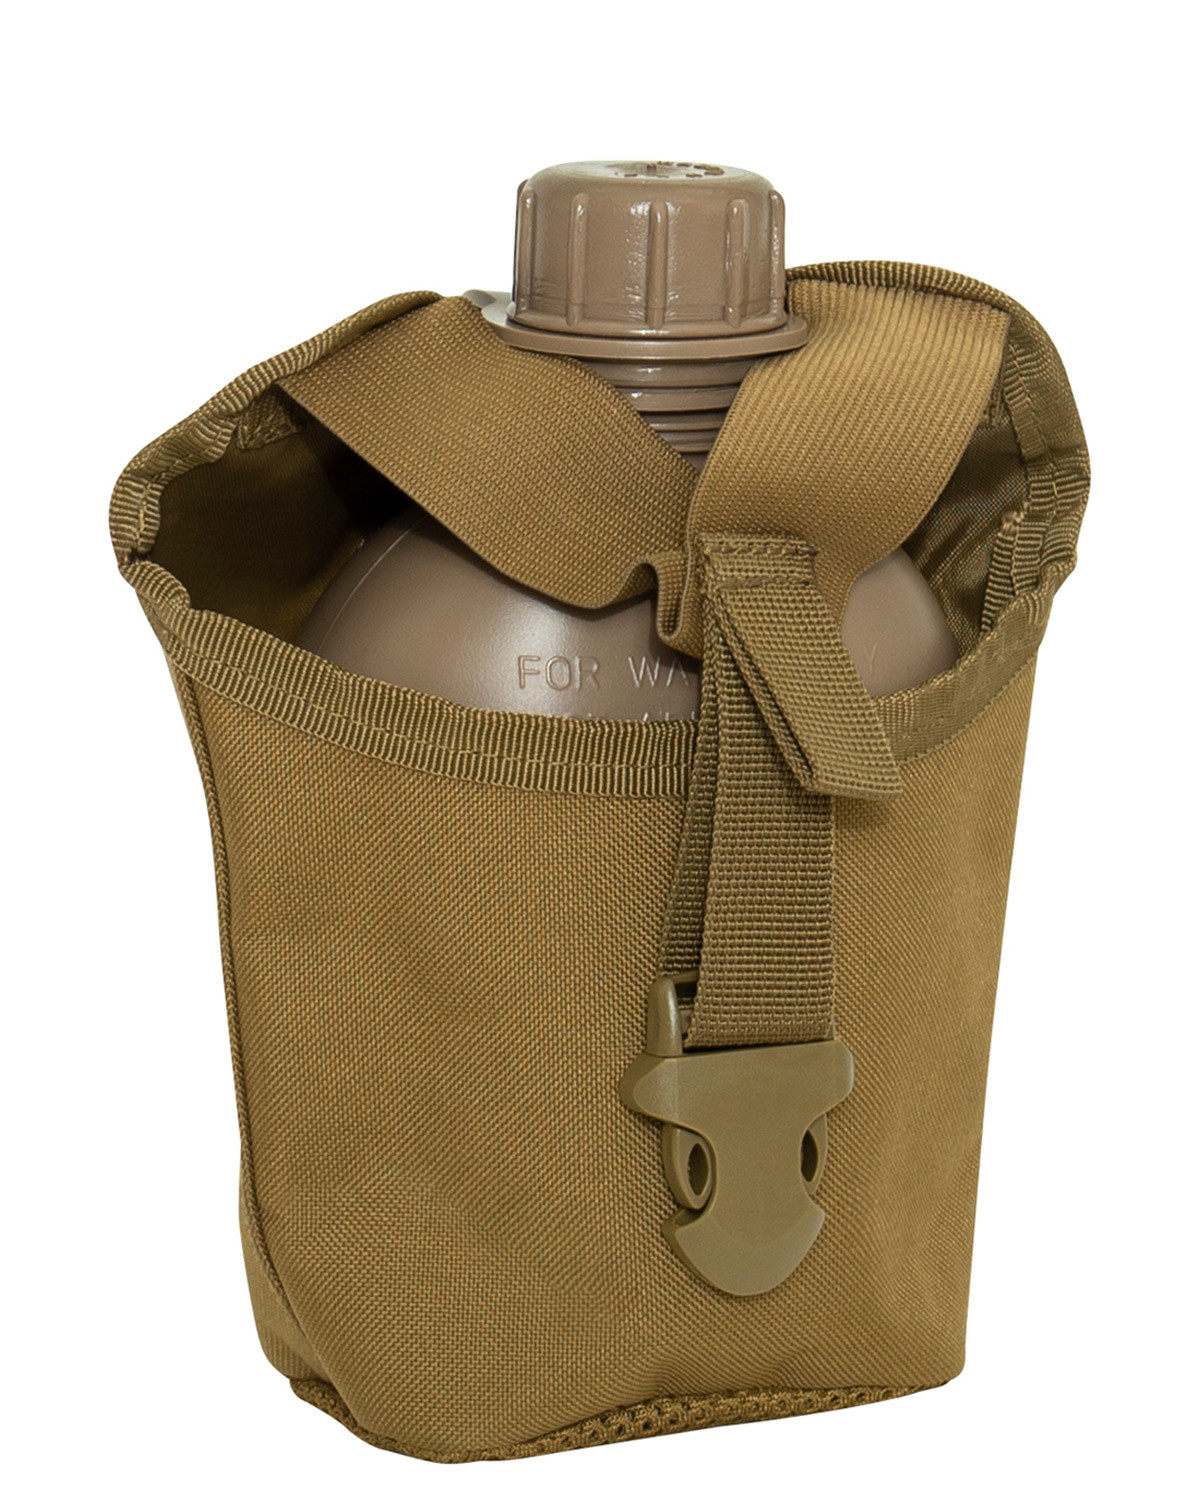 Rothco MOLLE Drikkedunk Etui 1 Liter (Coyote Brun, One Size)